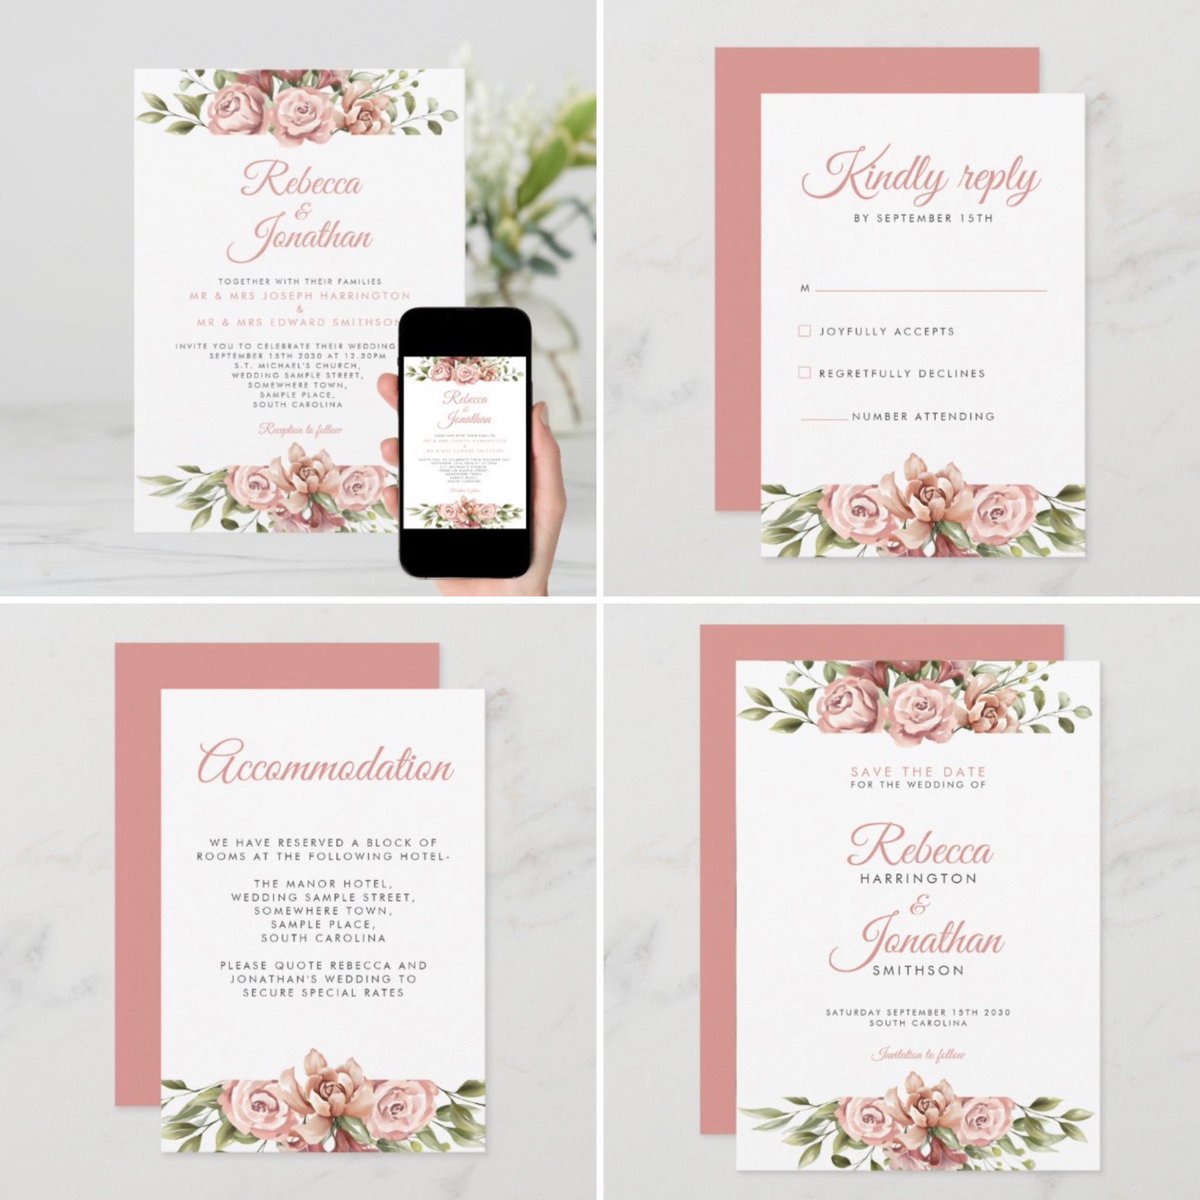 Save 15% off these gorgeous items in the Blush Pink Watercolor Floral Wedding Stationery suite. Check it out here… zazzle.co.uk/collections/bl…

#weddinginvitation #weddingday #blushpink #zazzlemade #MHHSBD